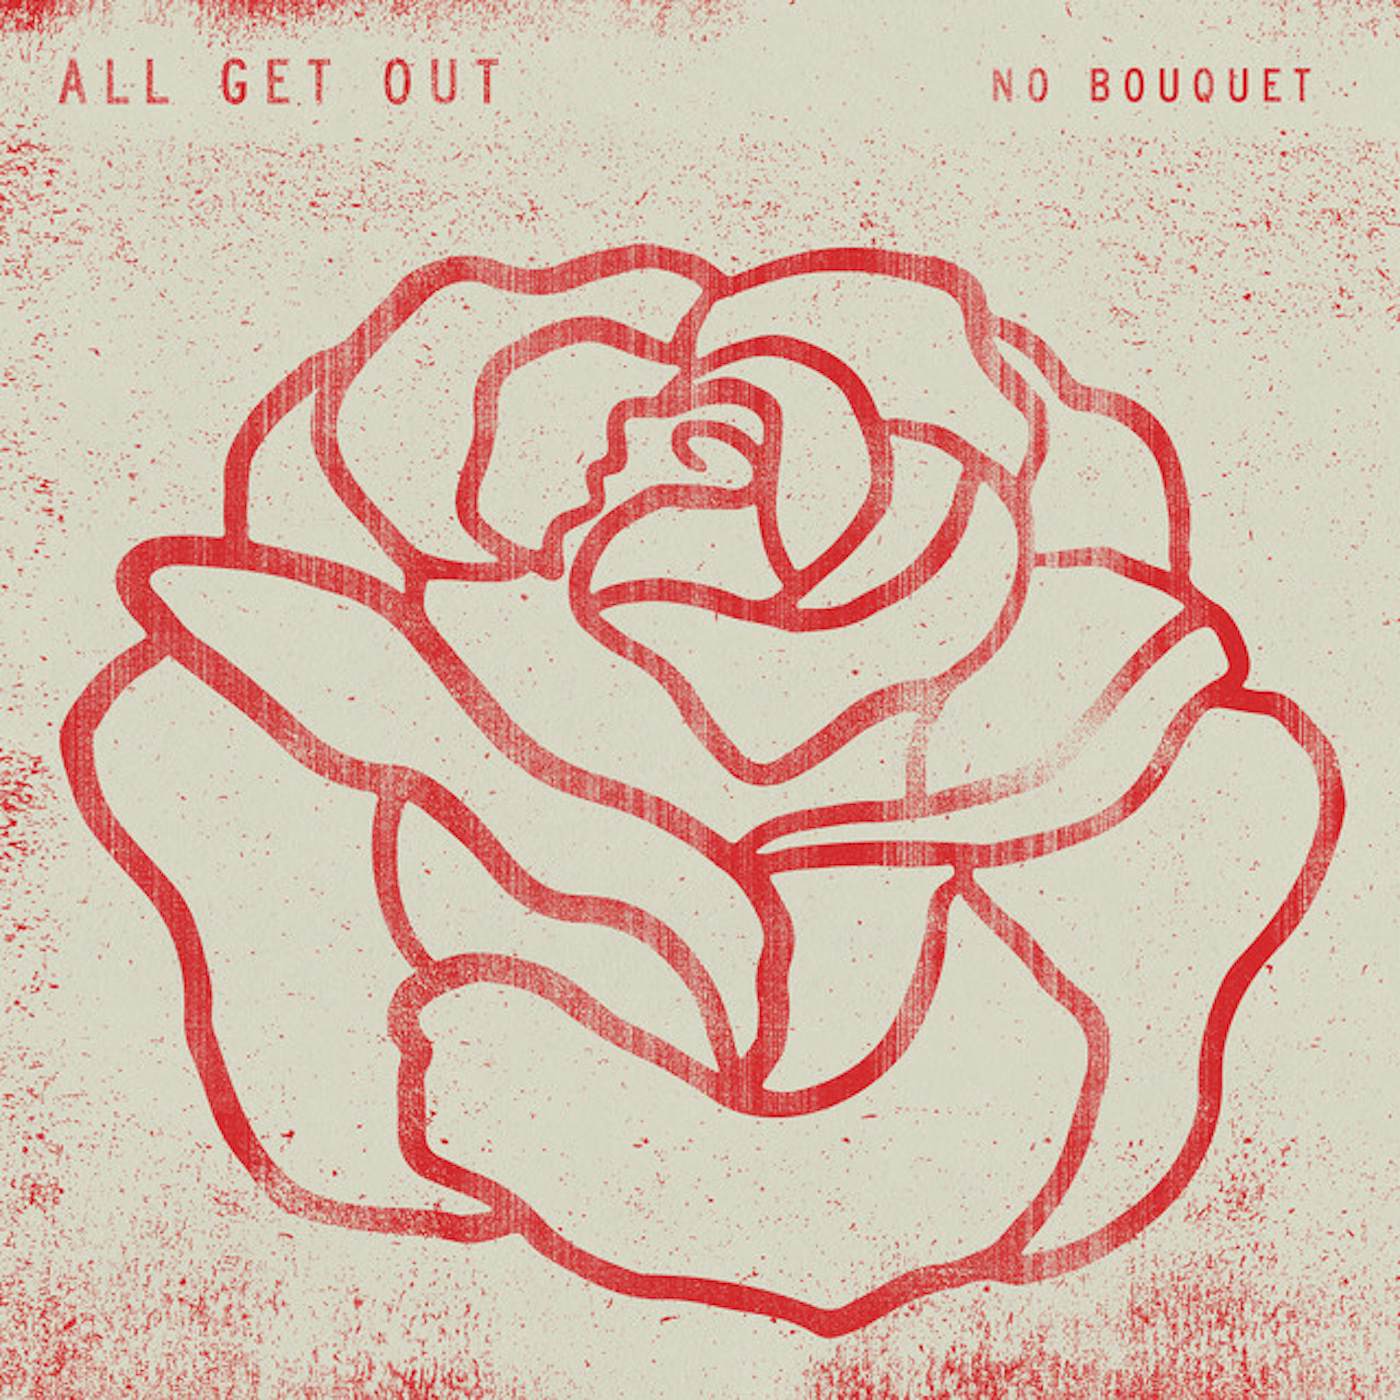 All Get Out No Bouquet Vinyl Record